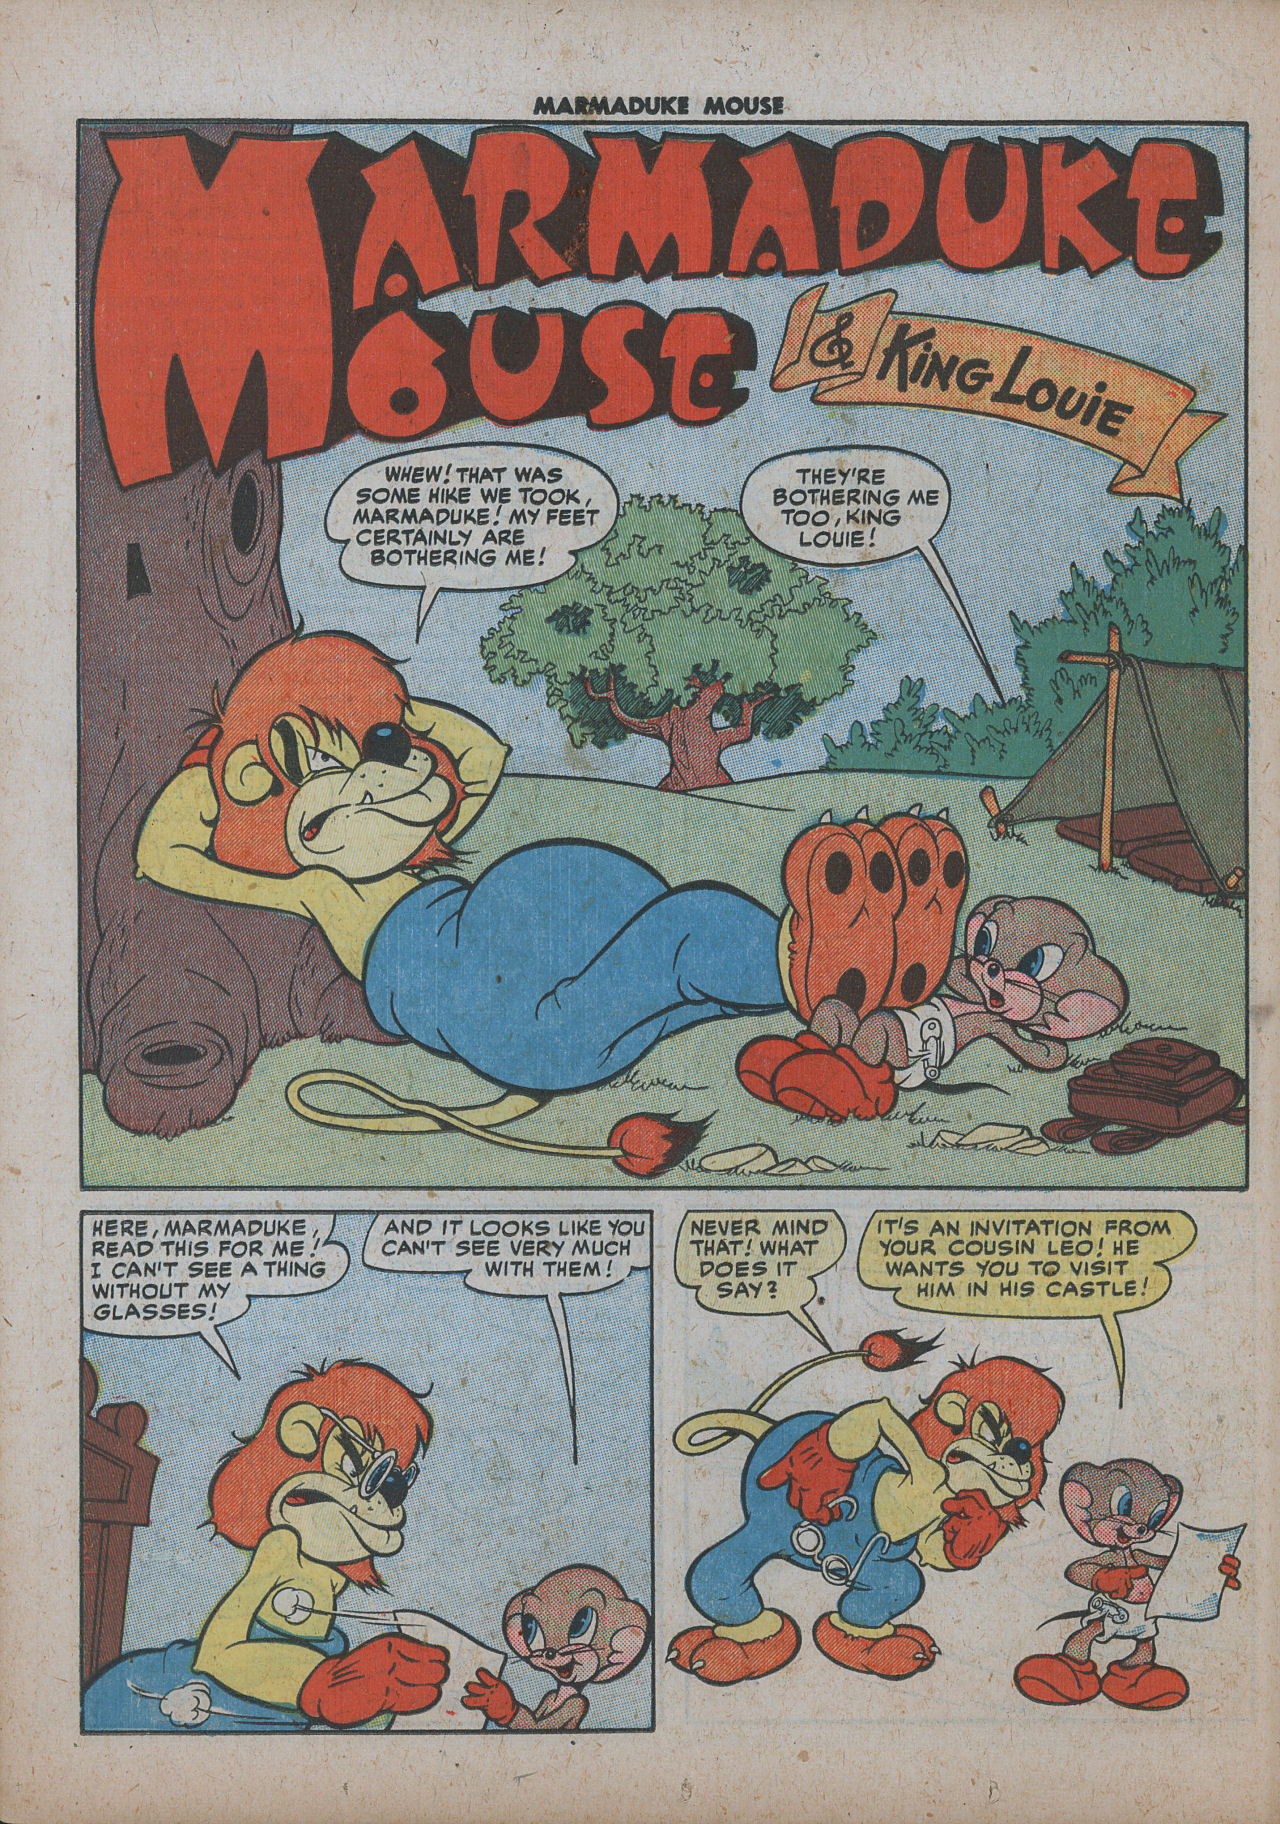 Read online Marmaduke Mouse comic -  Issue #23 - 26